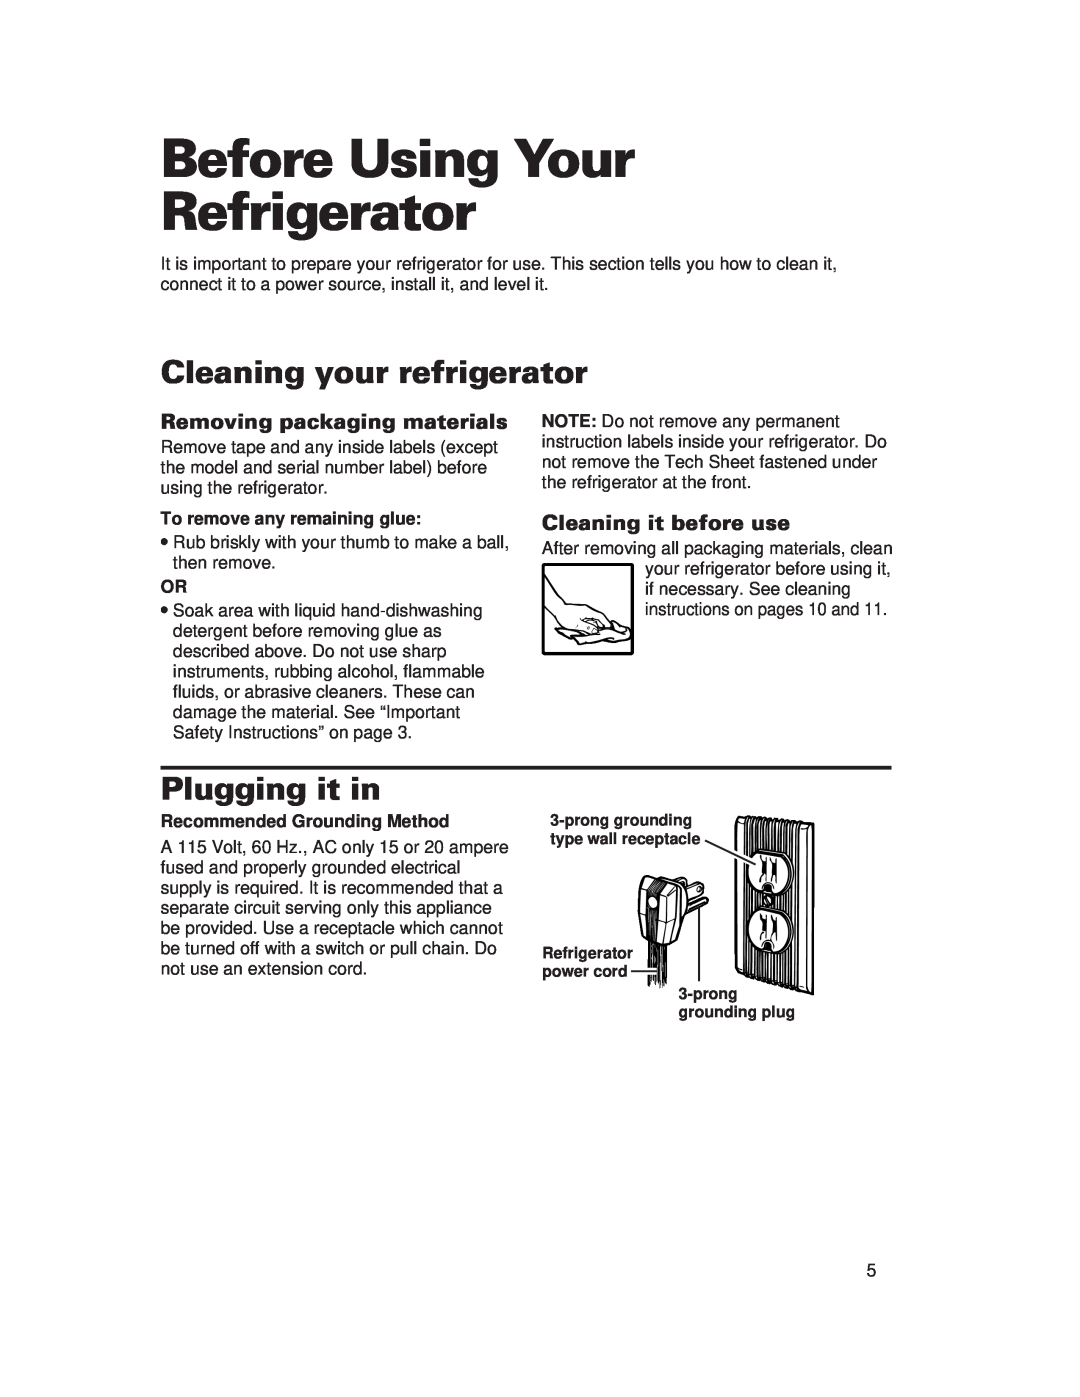 Whirlpool 1-34850/4390527 warranty Before Using Your Refrigerator, Cleaning your refrigerator, Plugging it in 